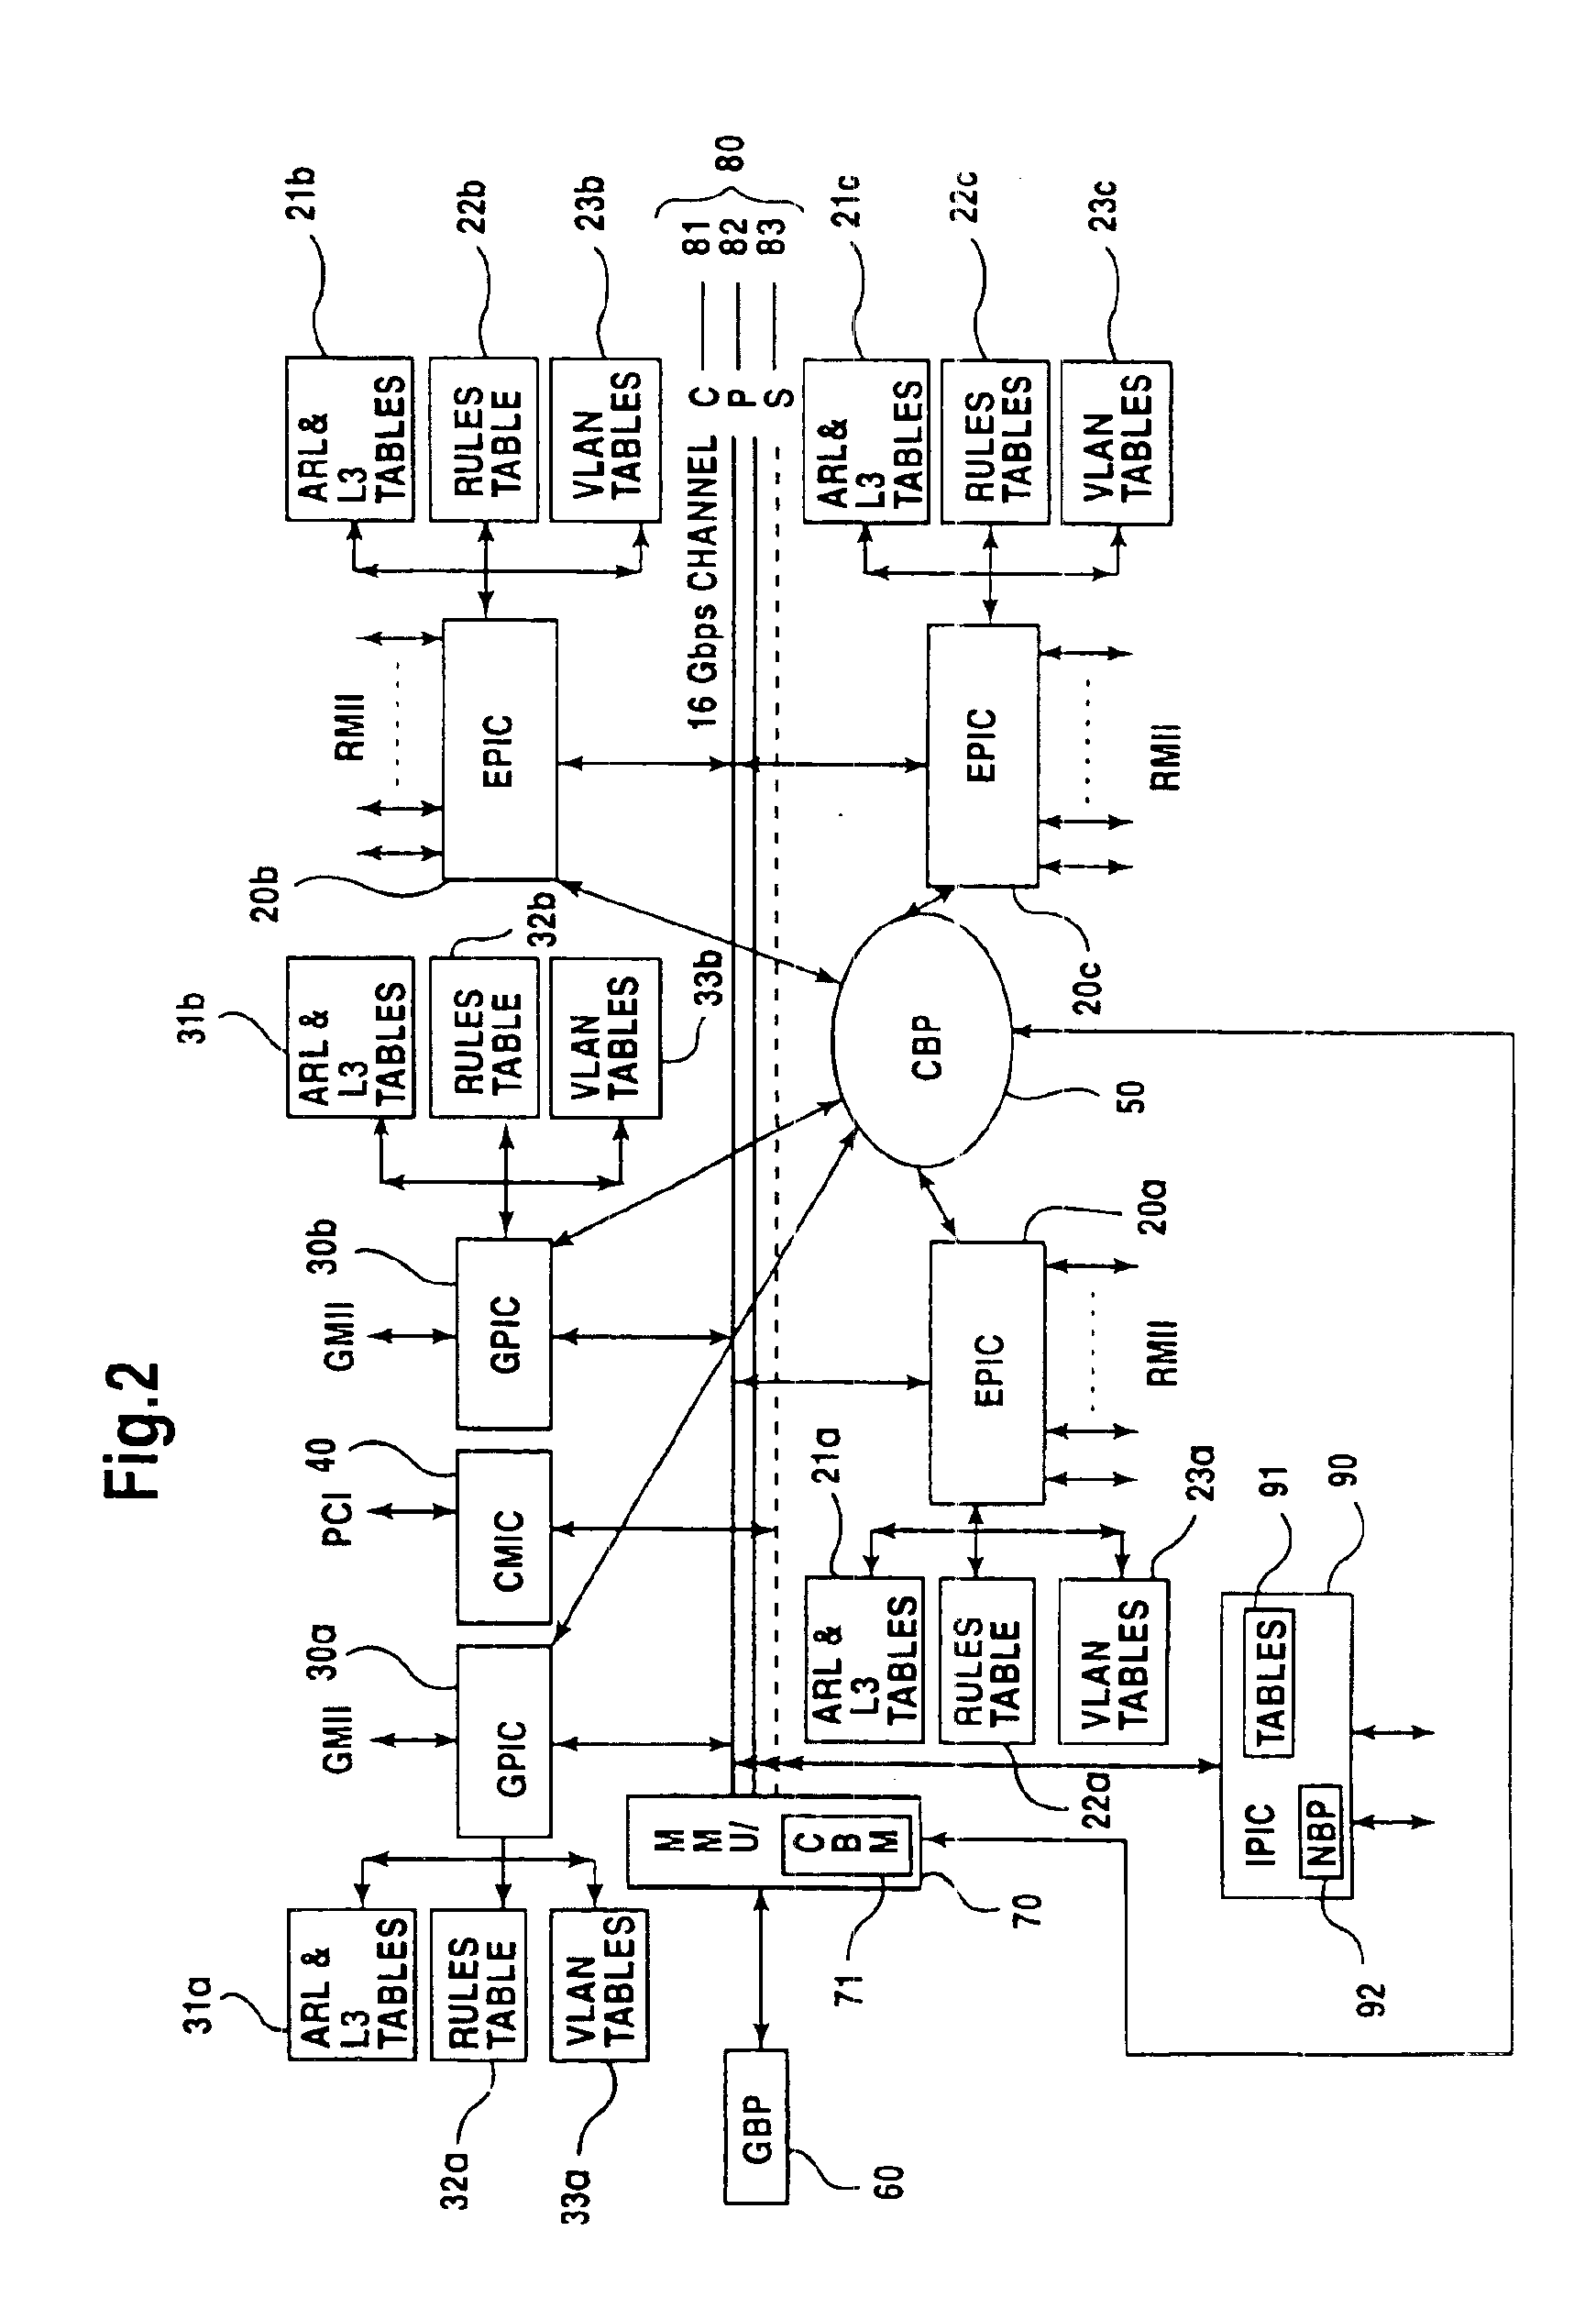 Network switch with high-speed serializing/deserializing hazard-free double data rate switching